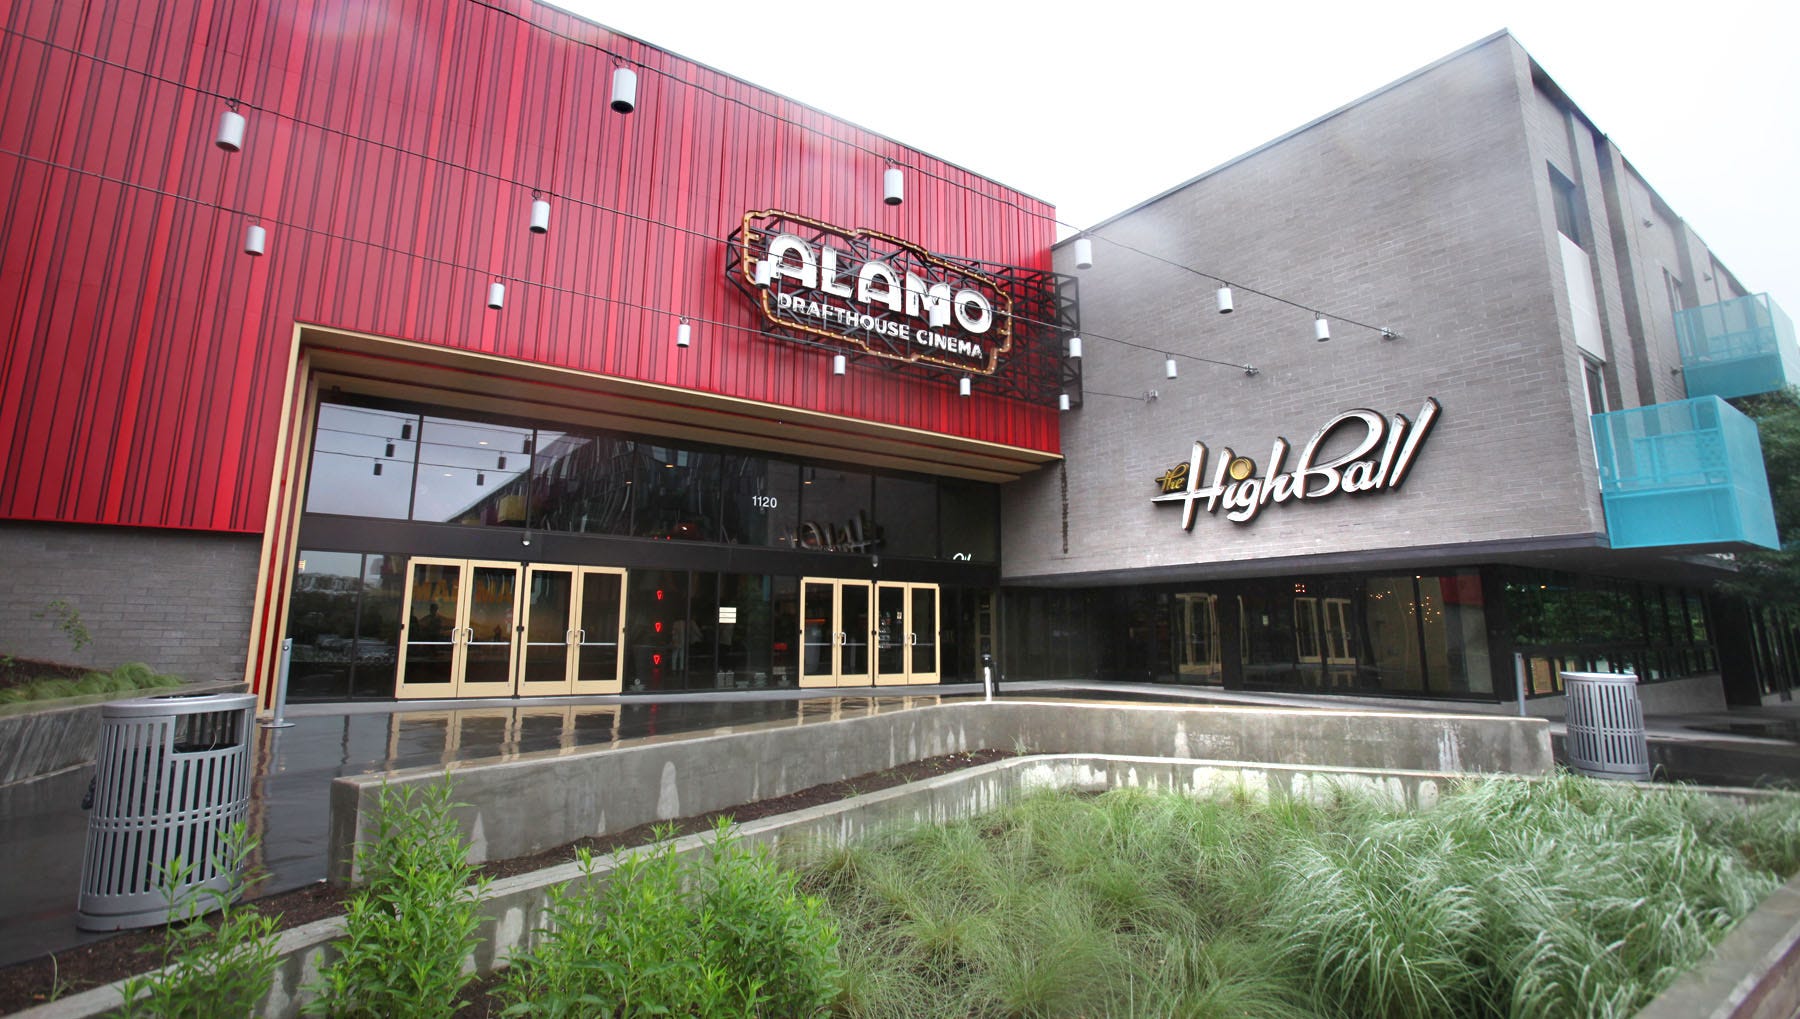 A golf-themed night of bourbon and film is coming to Alamo Drafthouse.